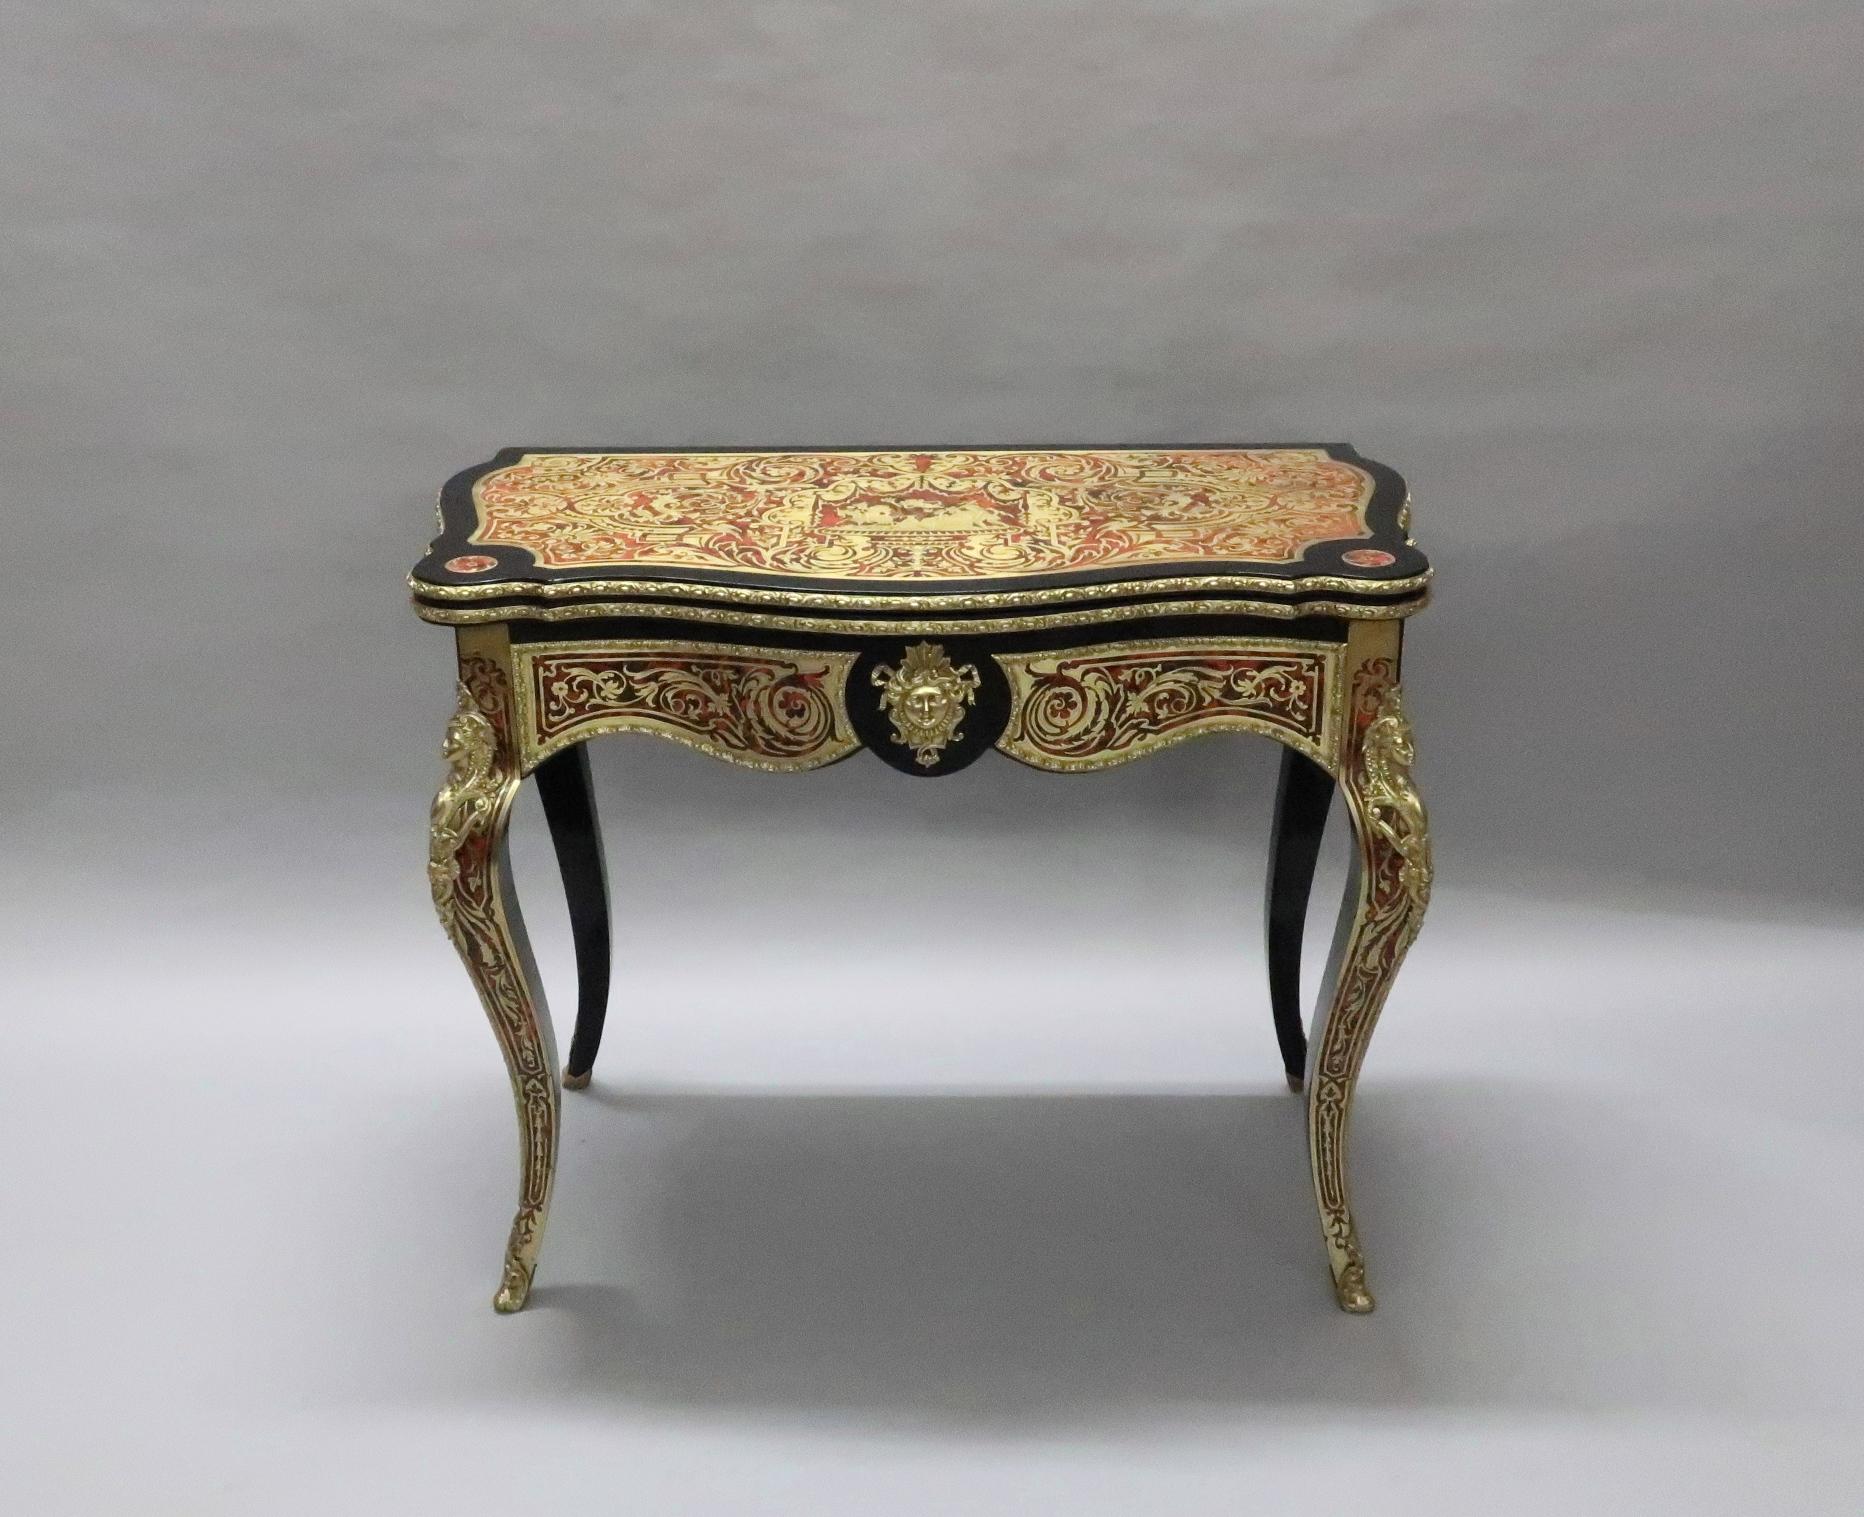 An extremely good quality French Napoleon III freestanding serpentine shaped fold over games or occasional table in the Louis XV style. The table is inlaid with engraved brass and red tortoise shell and is stood on square tapering cabriole legs. The